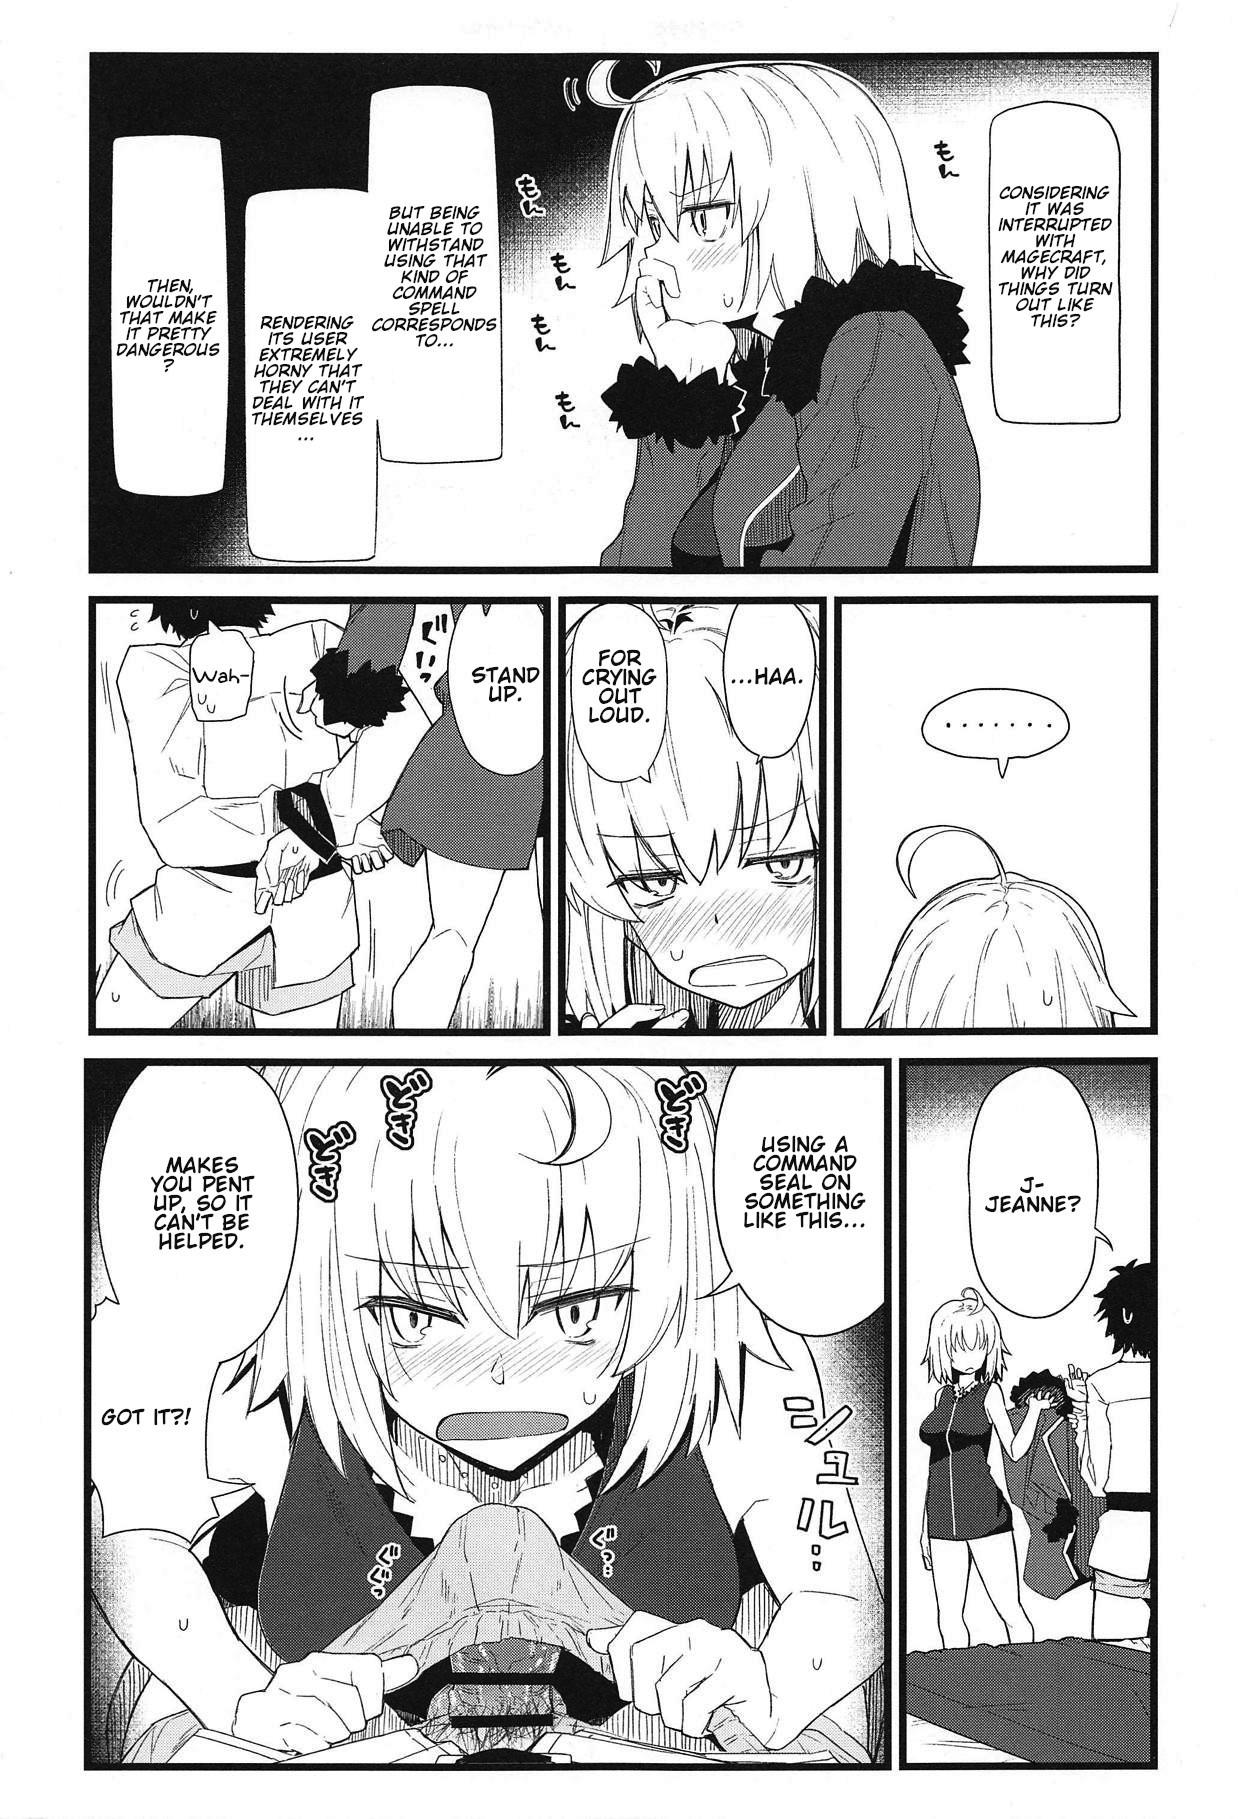 Double GIRLFriend's 15 - Fate grand order Gay College - Page 4